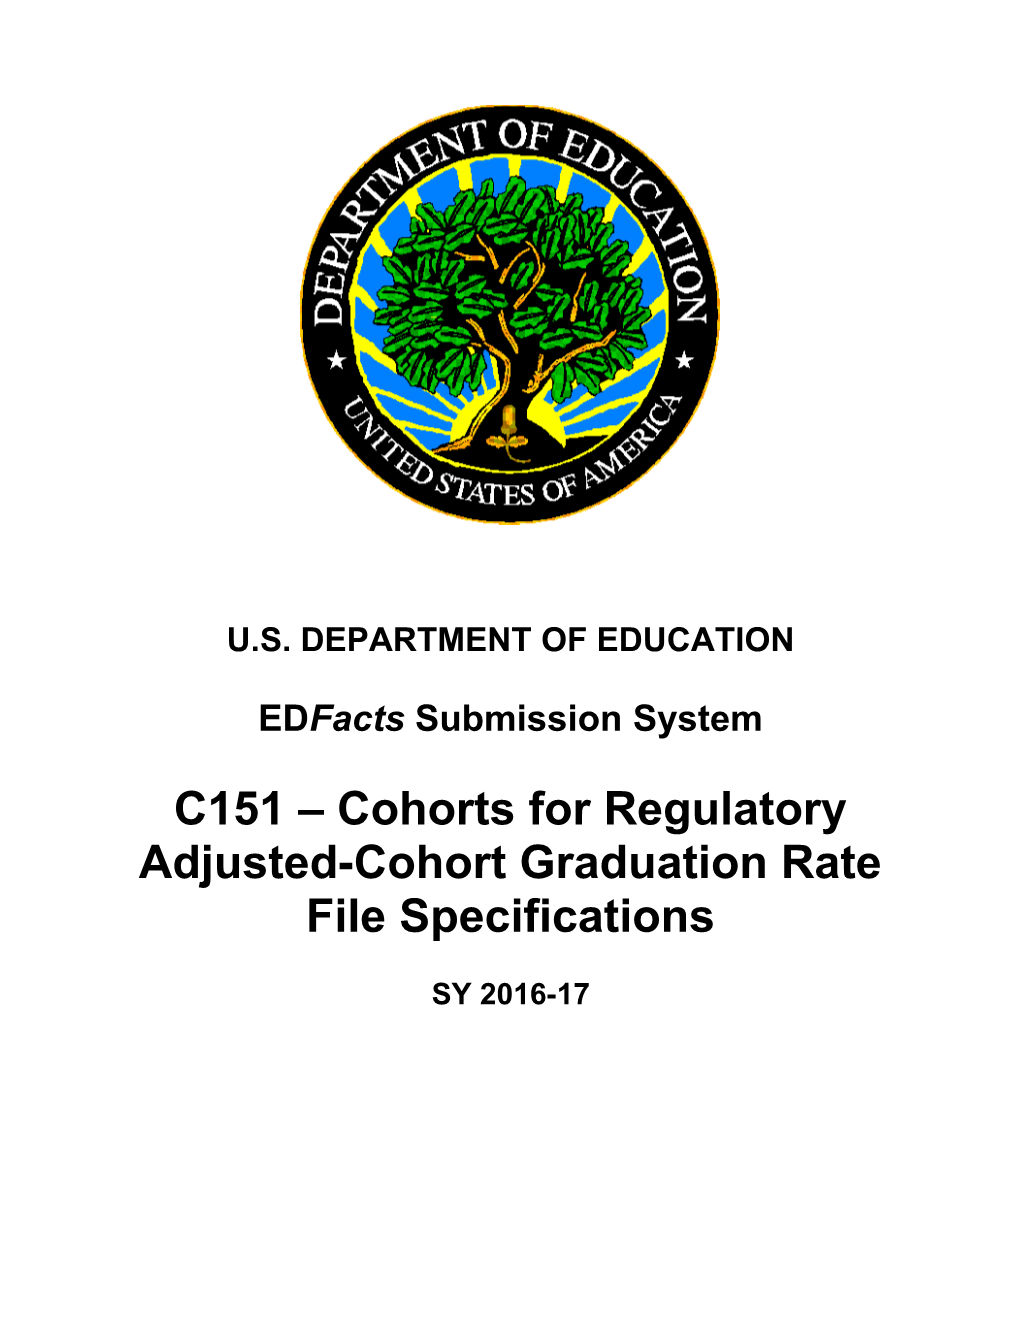 C151 Cohorts for Regulatory Adjusted-Cohort Graduation Rate File Specifications (Msword)